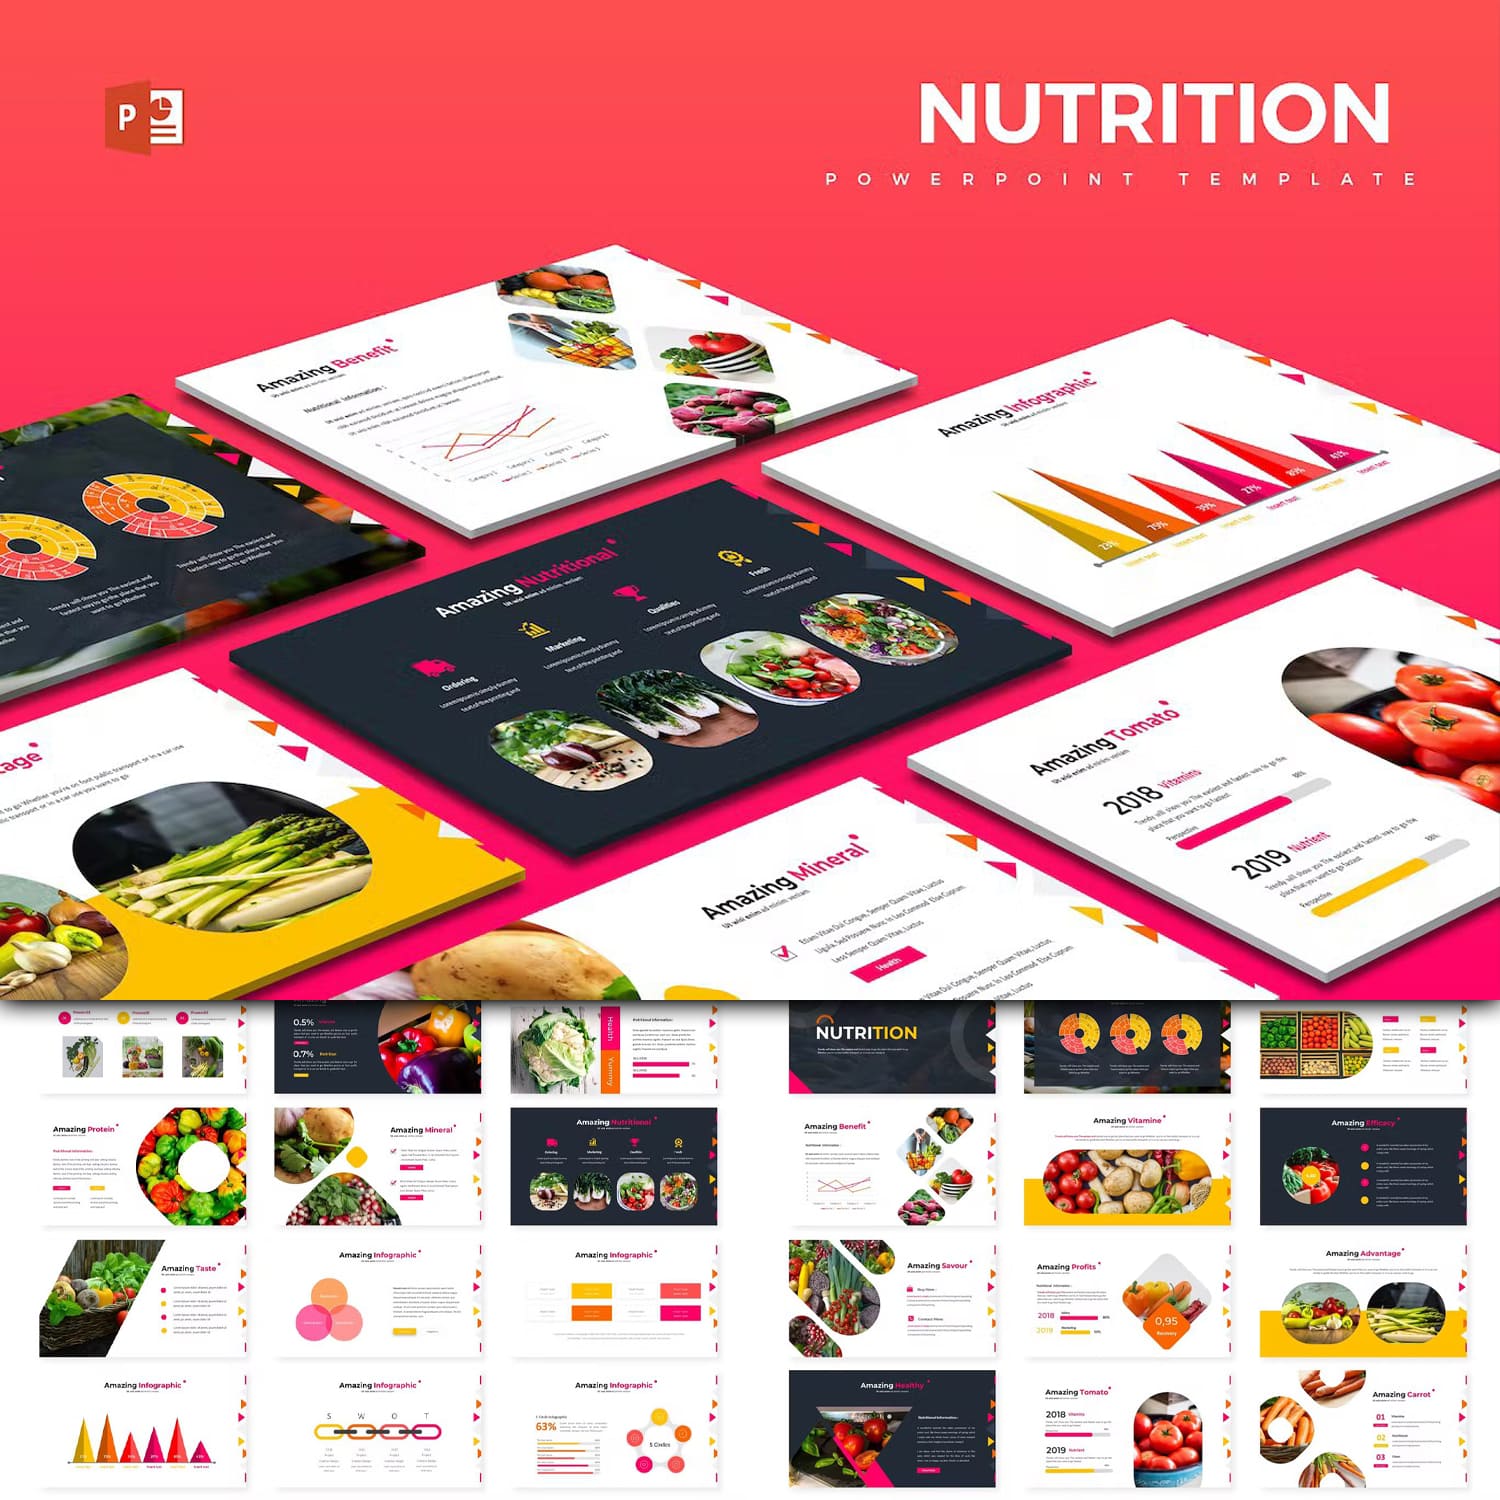 Nutrition powerpoint template - main image preview.